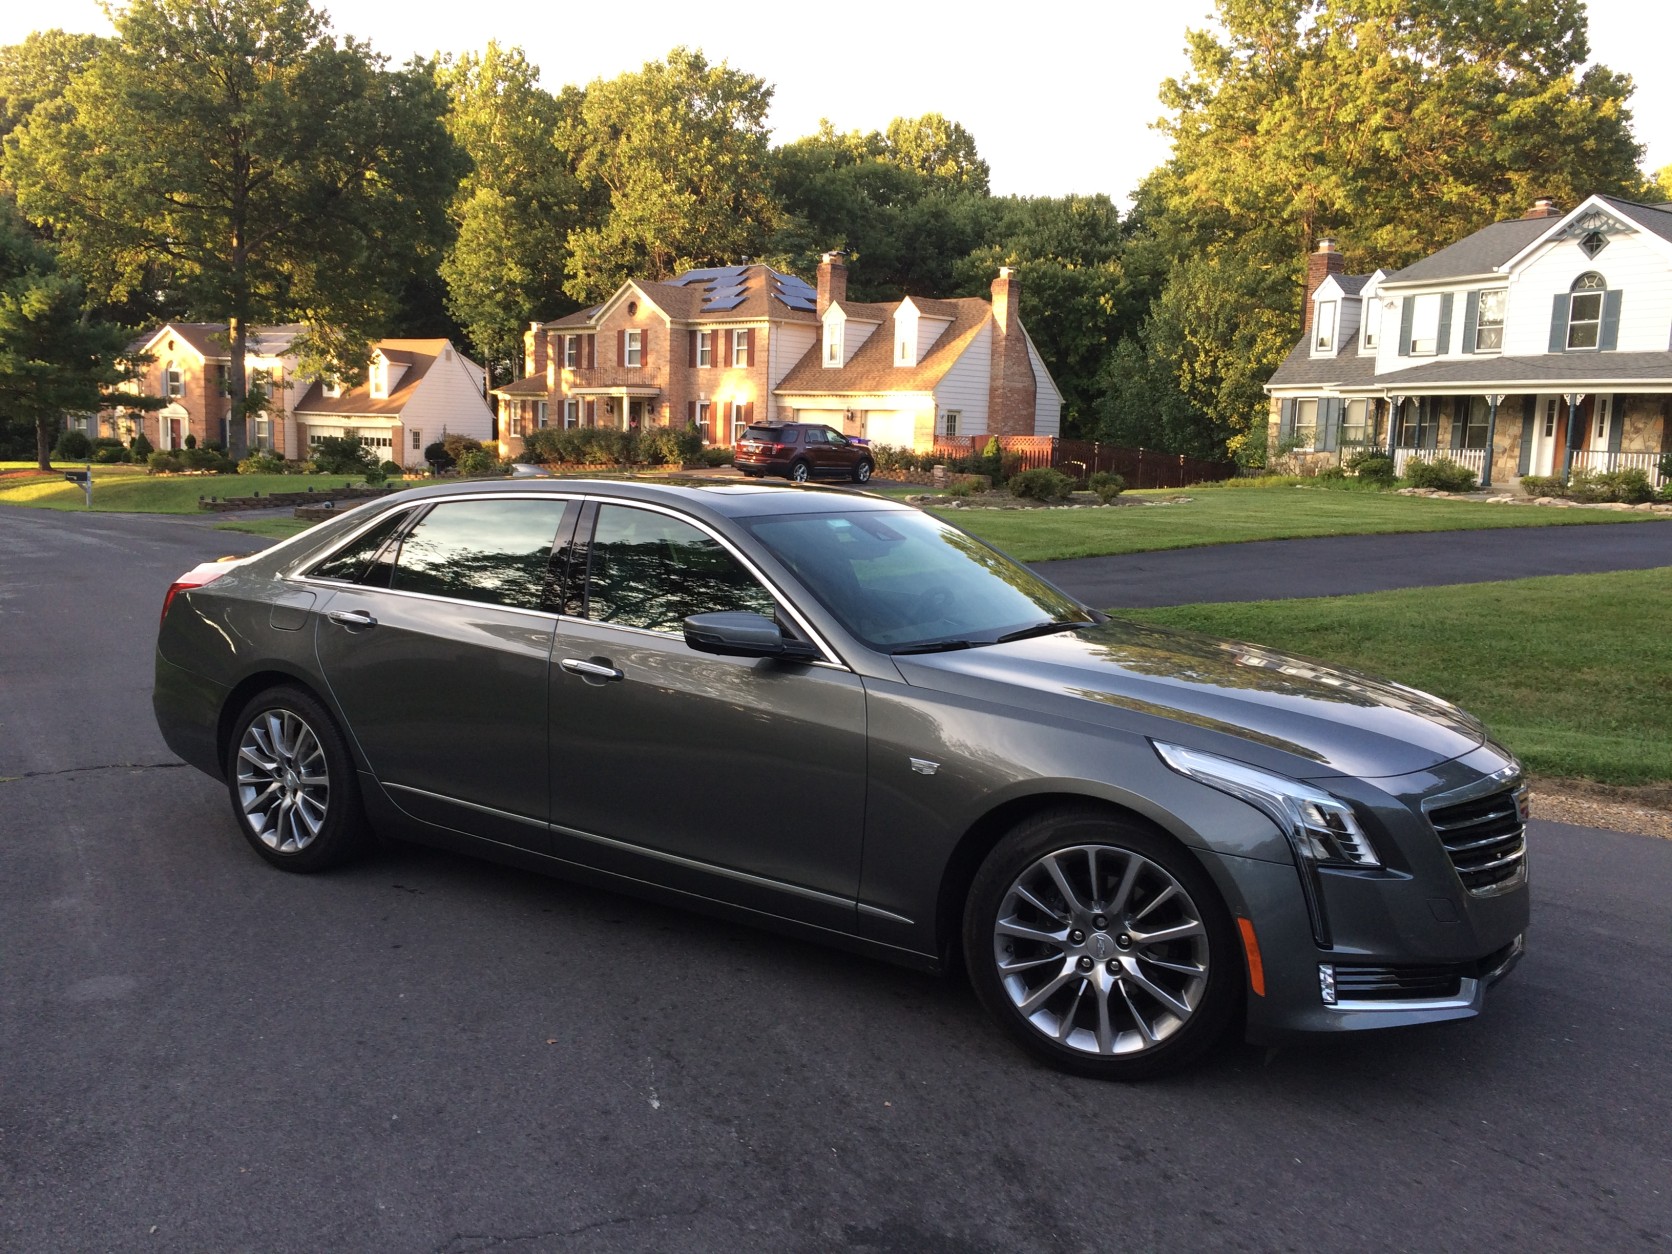 The new CT6 seems to check off many of the boxes on what a large luxury sedan should be. (WTOP/Mike Parris)